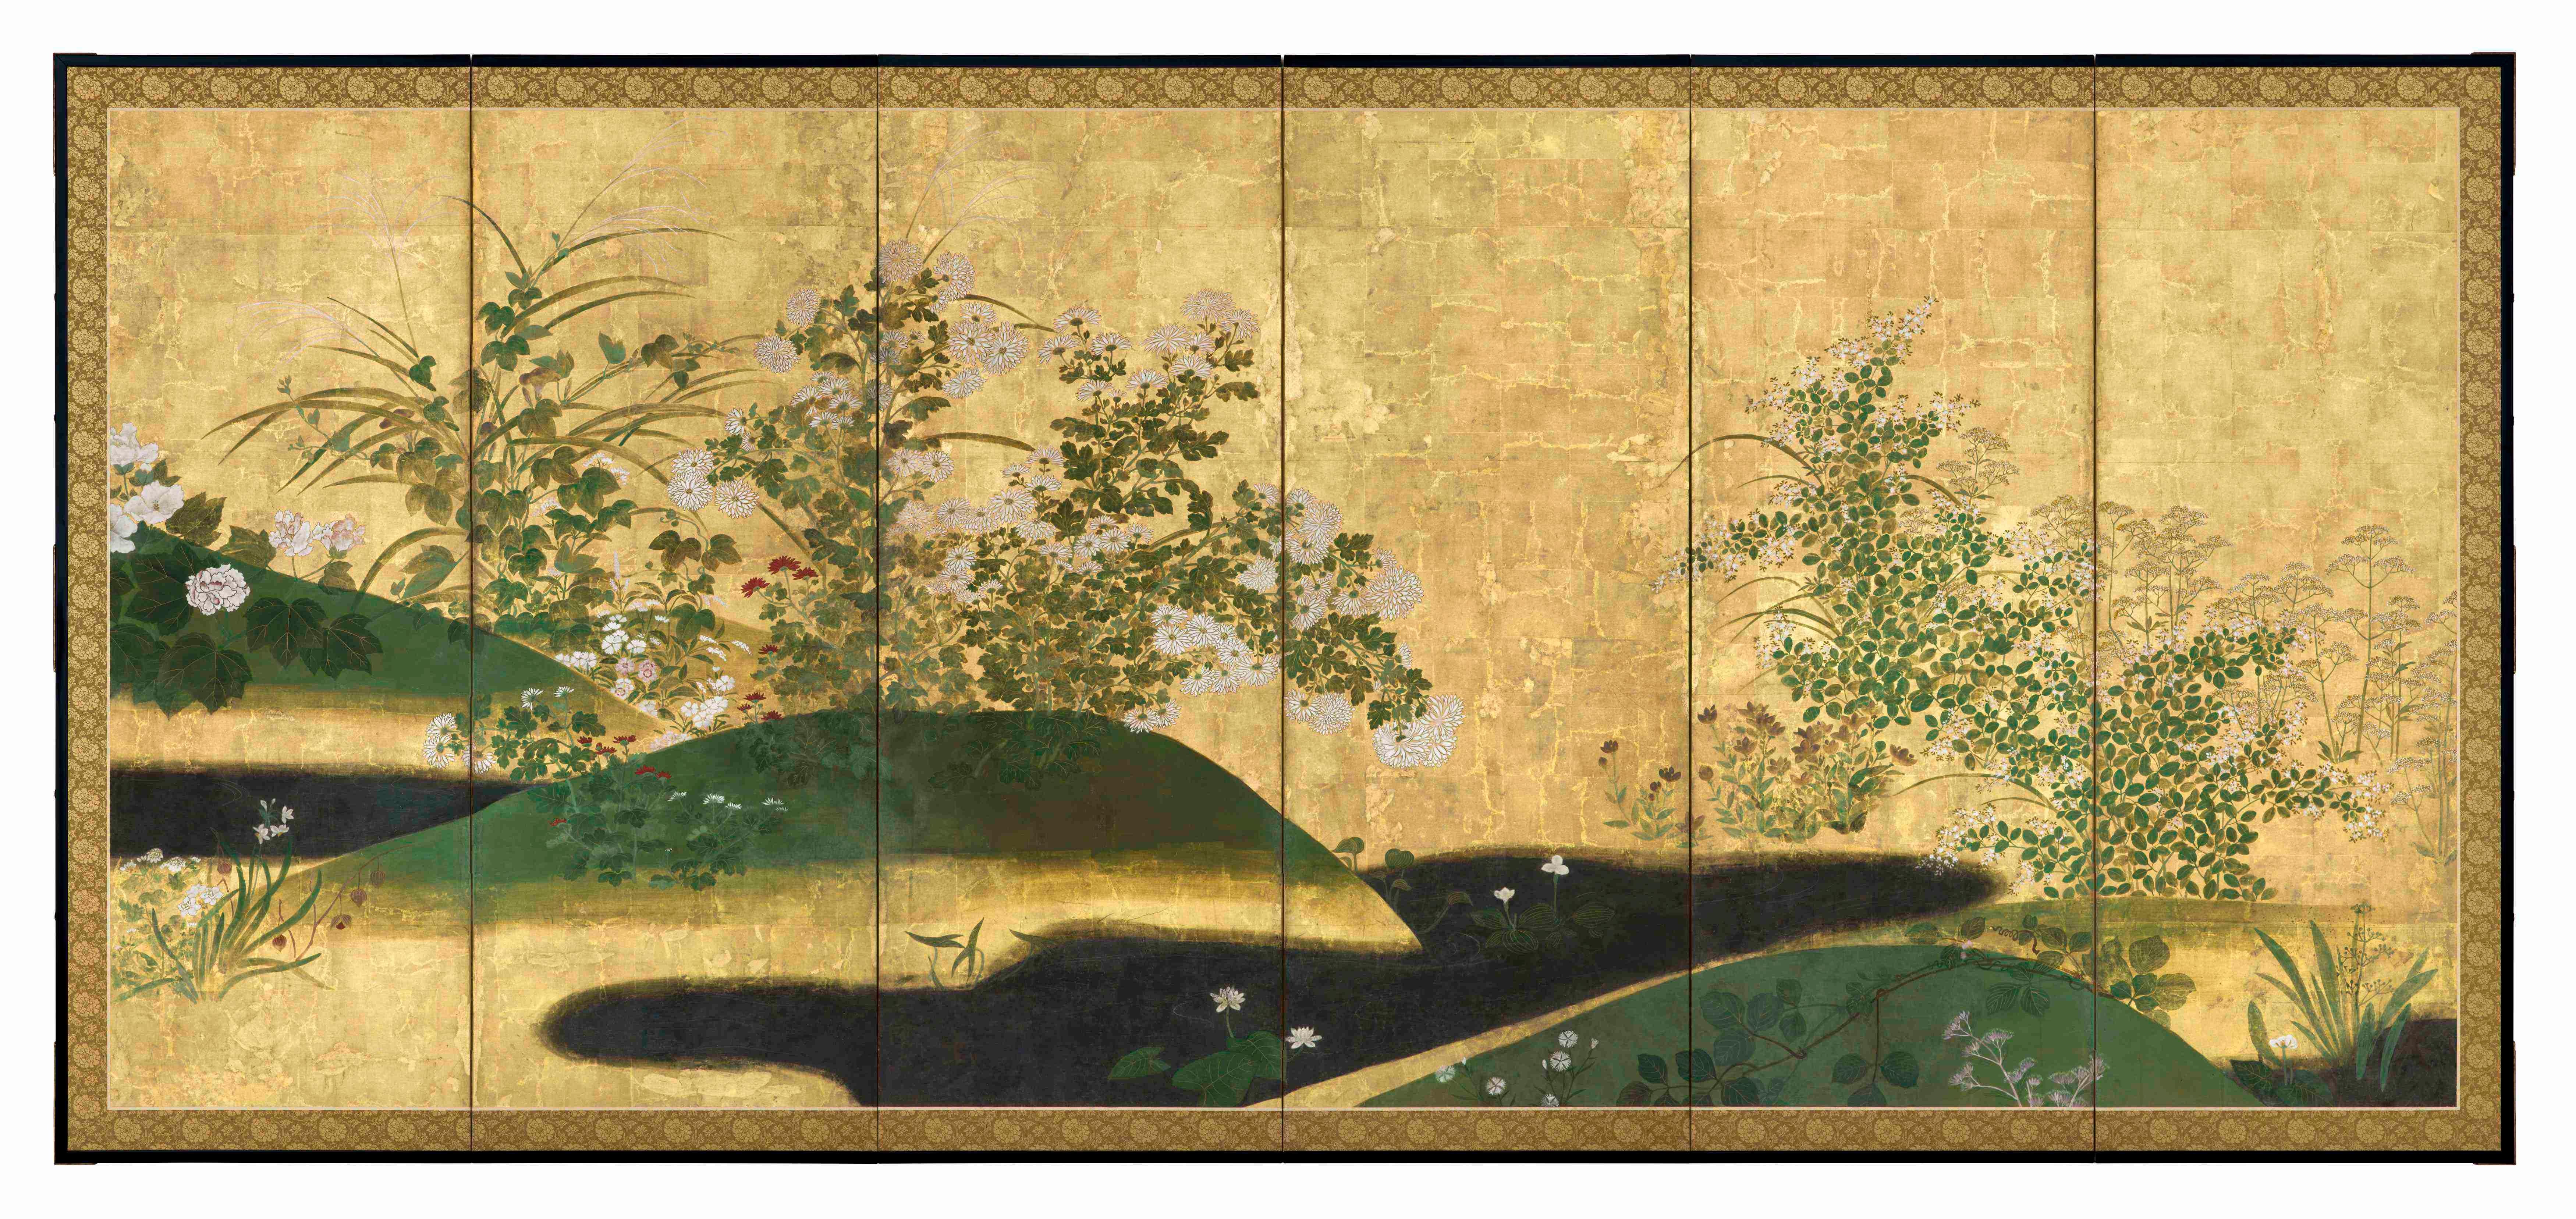 Pair of six-panel folding screens; ink, mineral colors, go fun, and gold on paper with gold leaf
Rinpa School, Edo period (1615-1868).